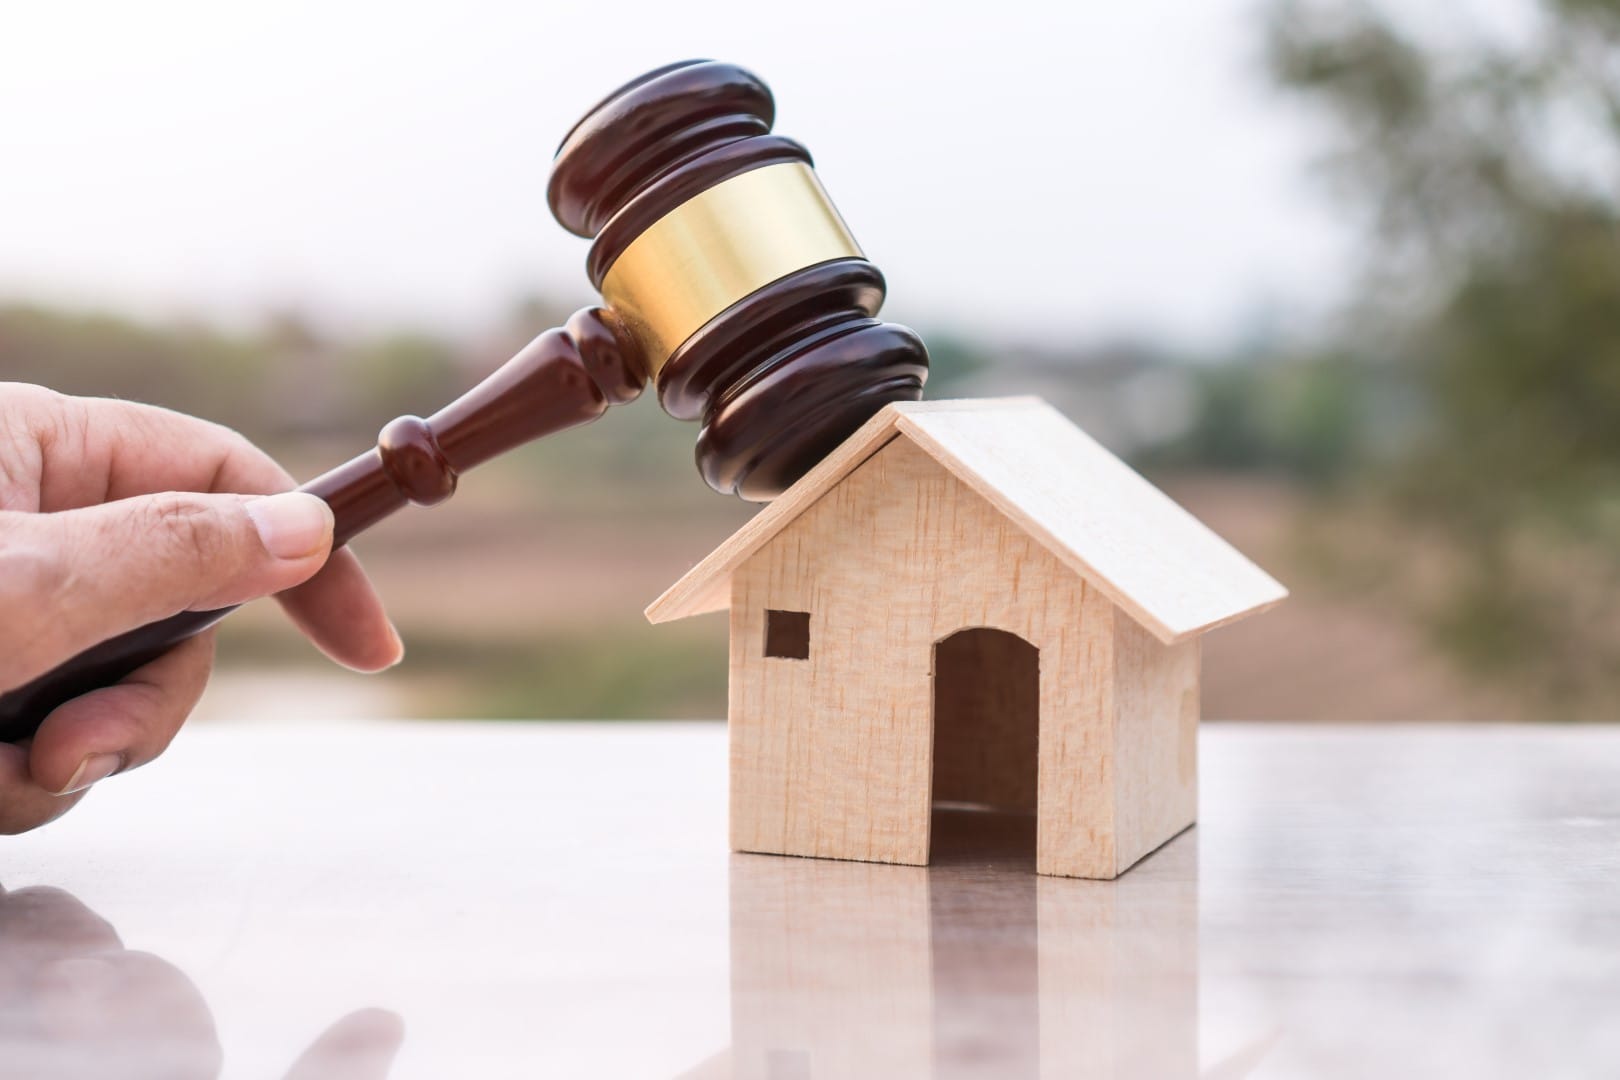 Florida home to three-quarters of U.S. property insurance lawsuits